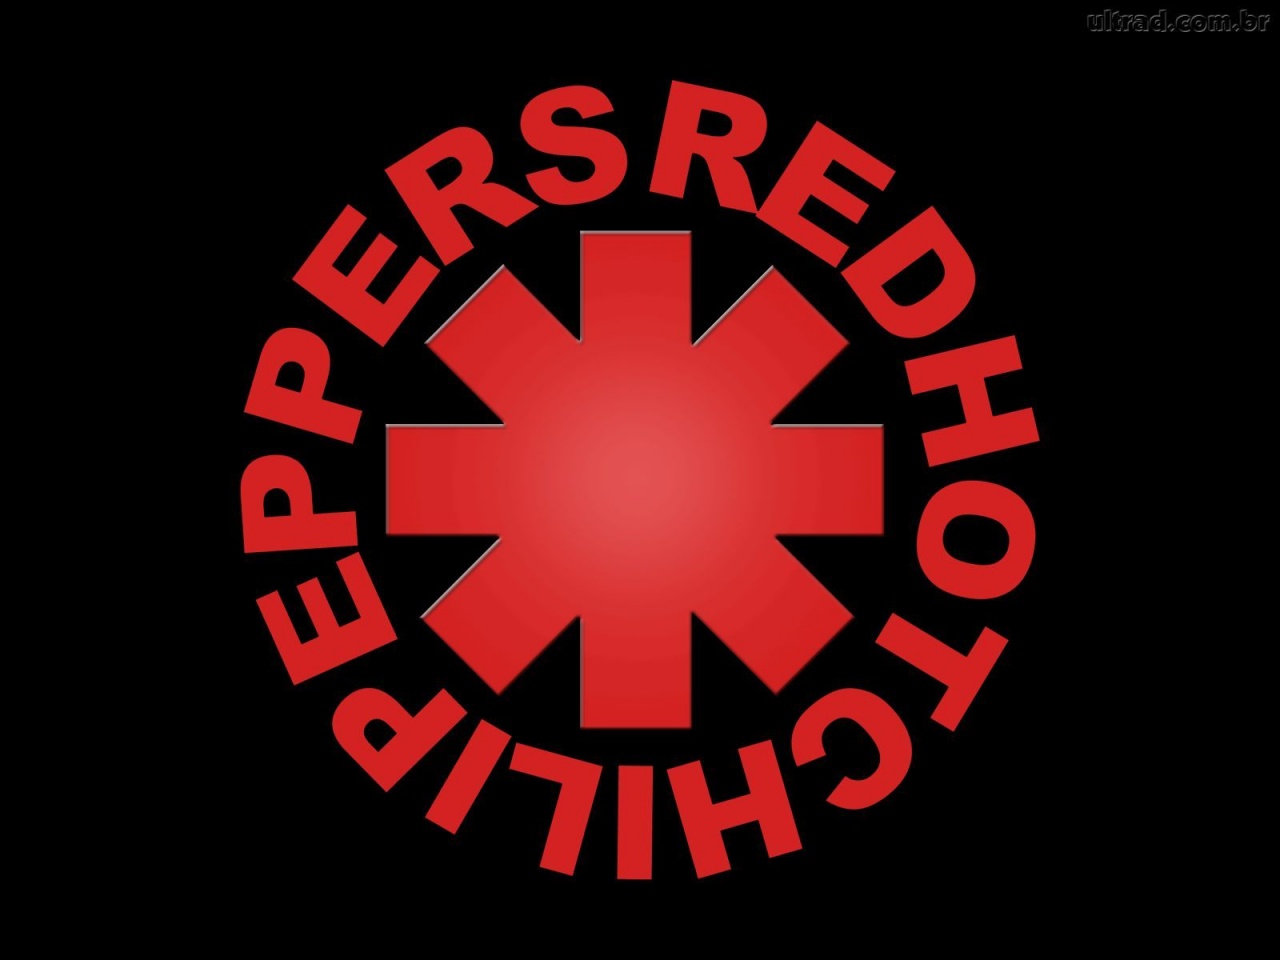 Red Hot Chili Peppers Greatest Hits Vinyl - Red Hot Chili Peppers - HD Wallpaper 